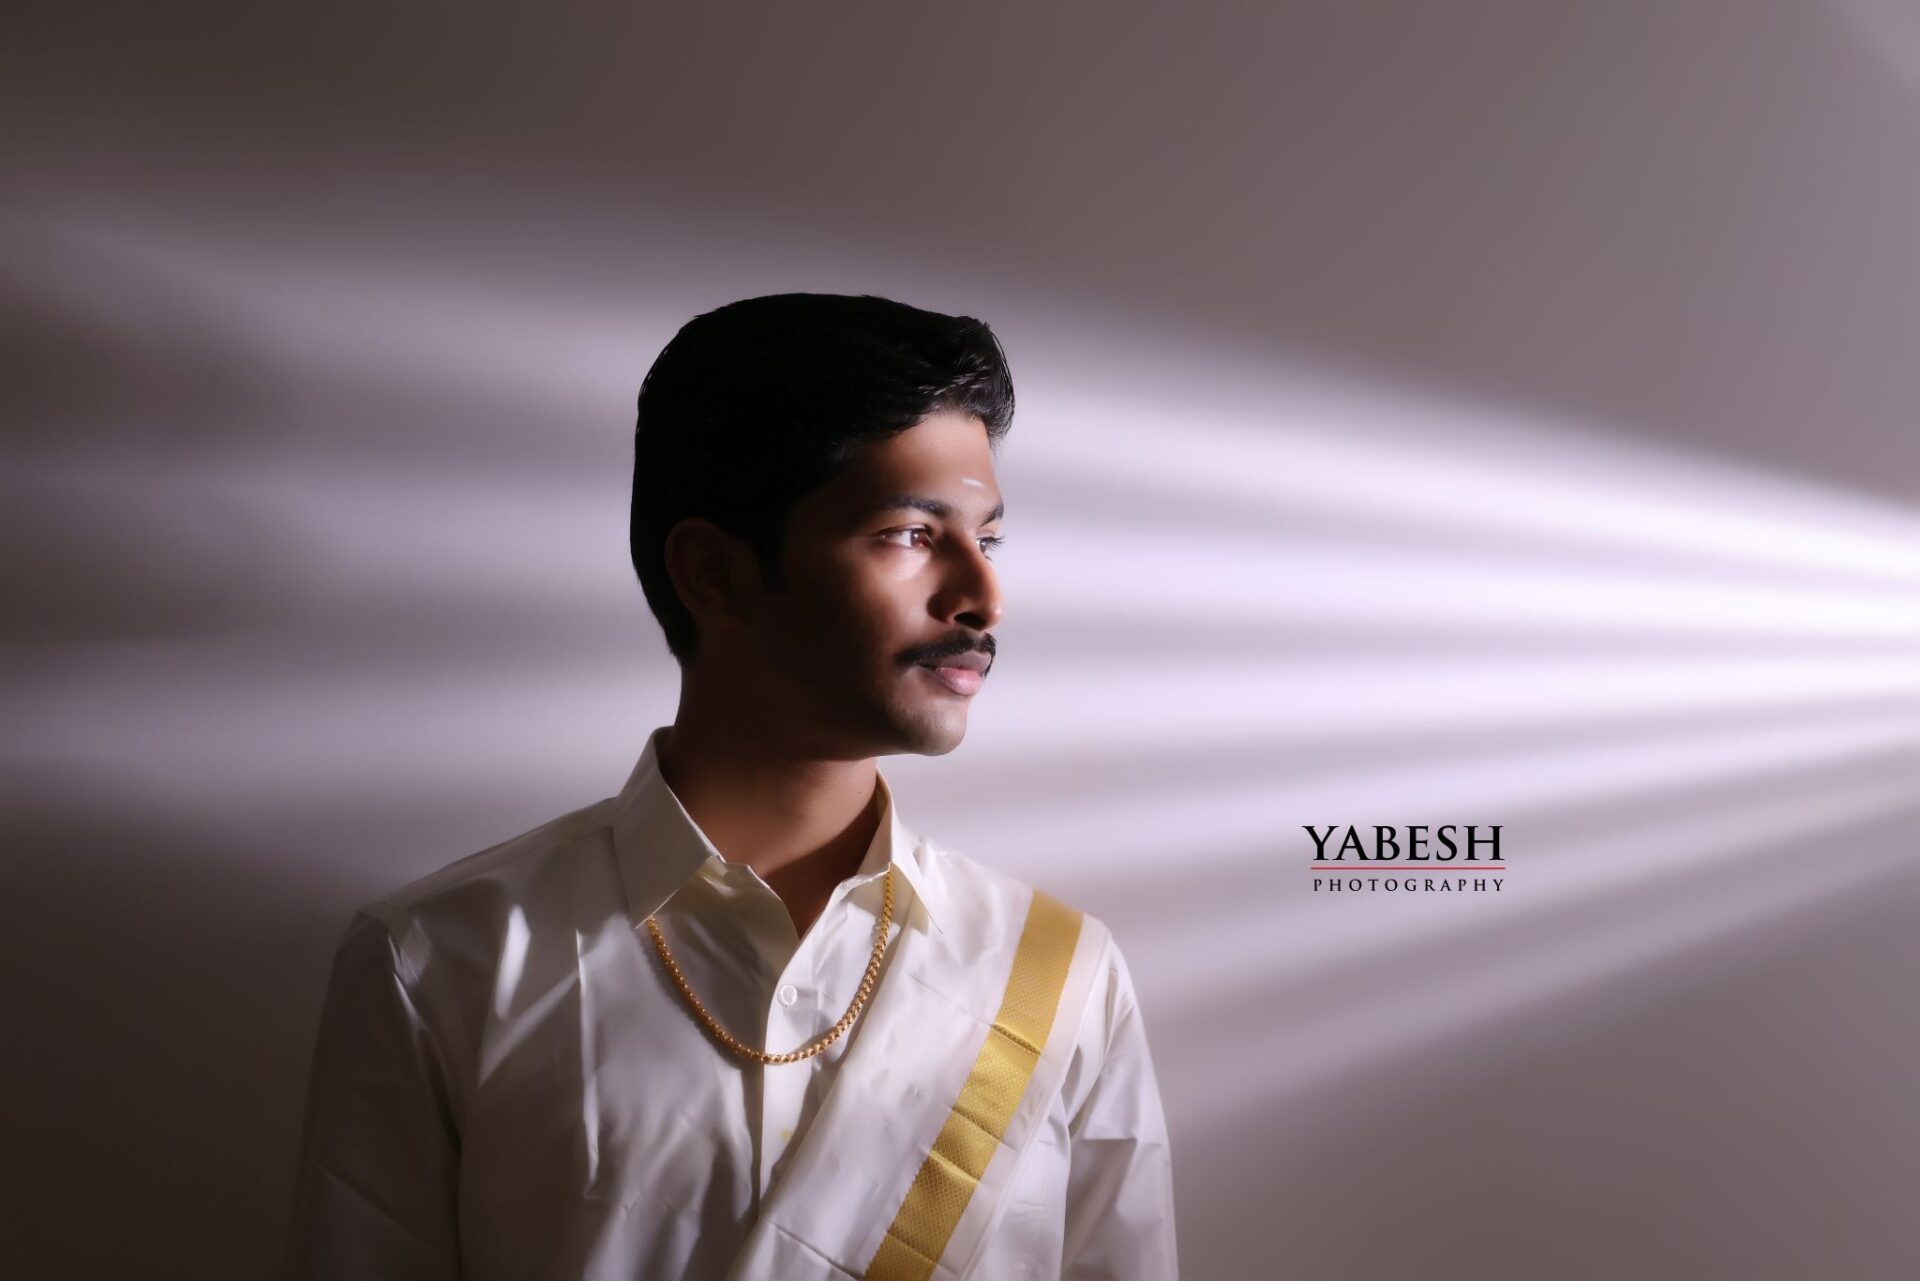 Gowtham & Sangeetha's Dreamy Wedding Shoot: Captured by Yabesh Photography!